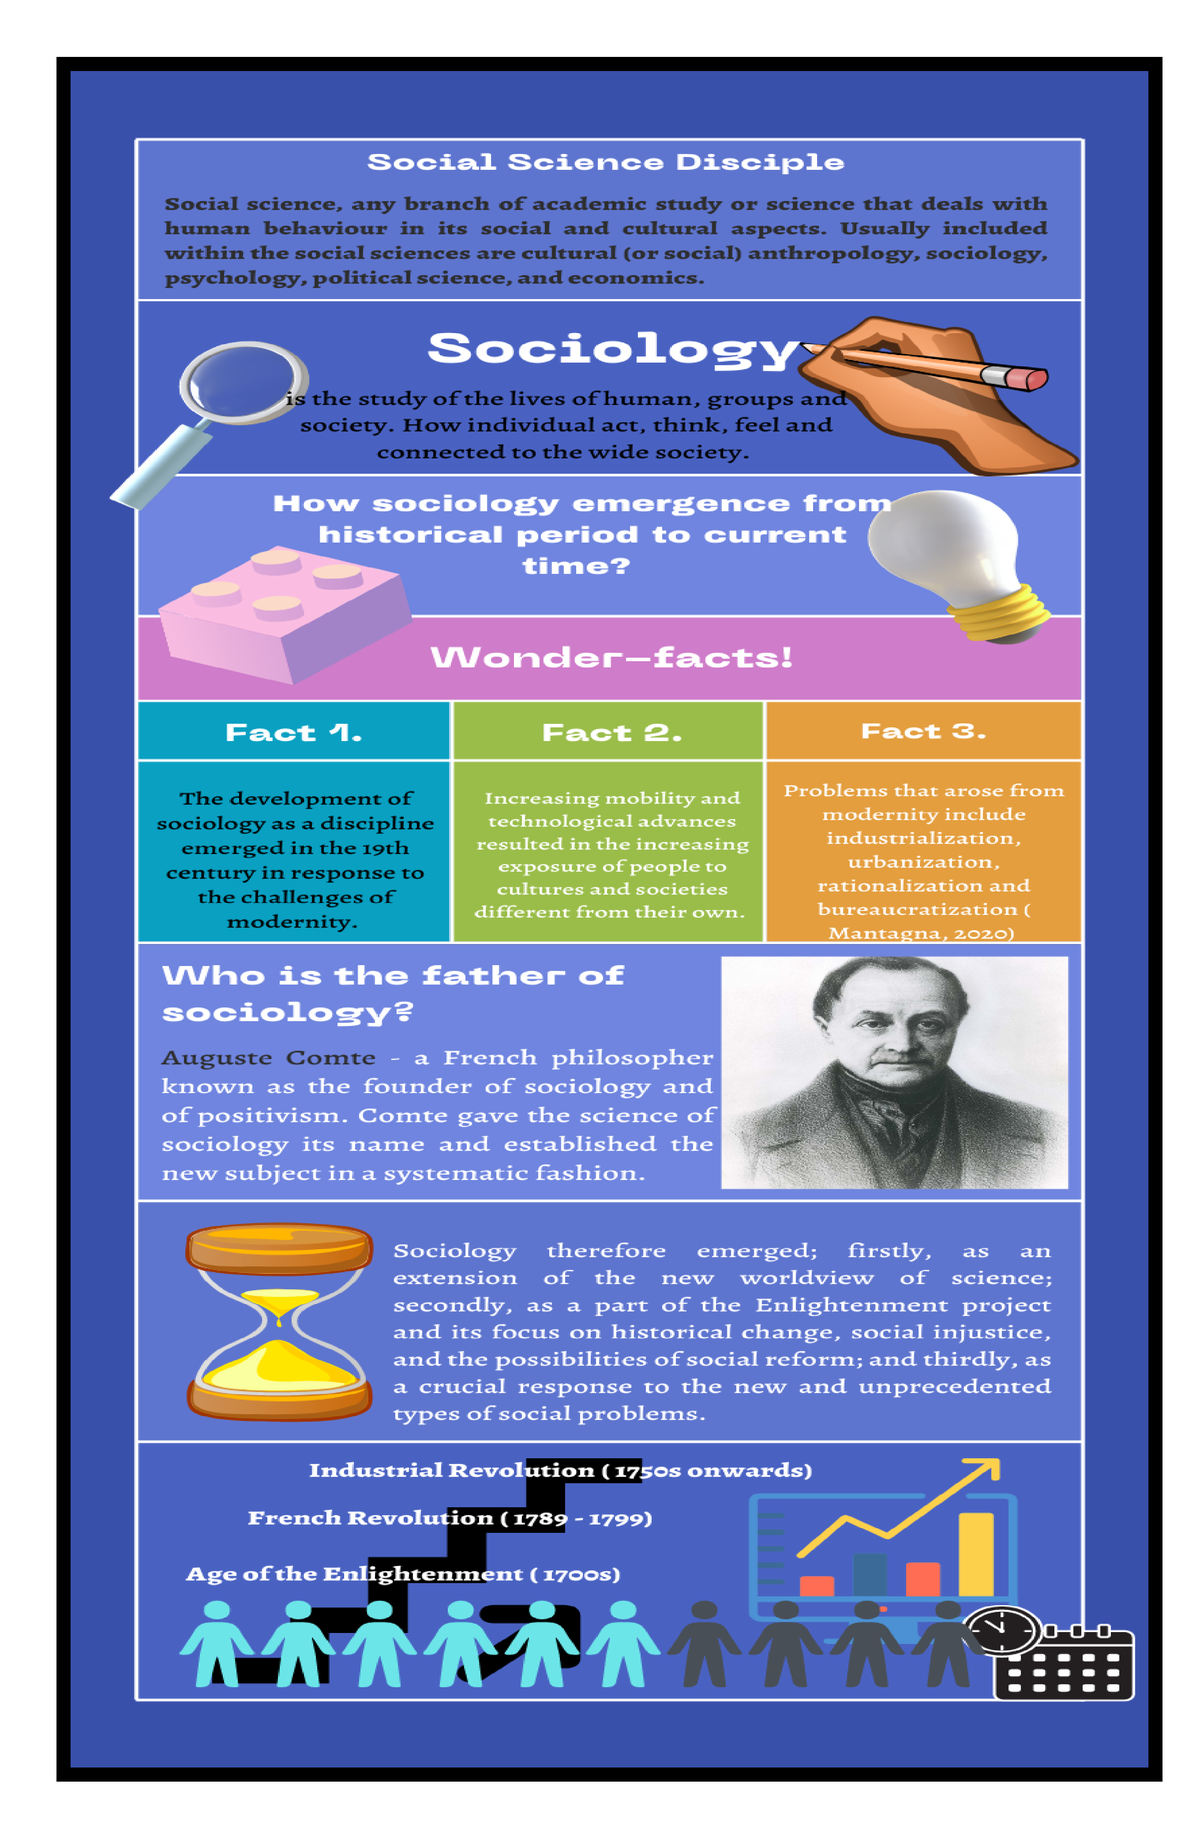 Documented infographic about sociological events BS Social Work Studocu